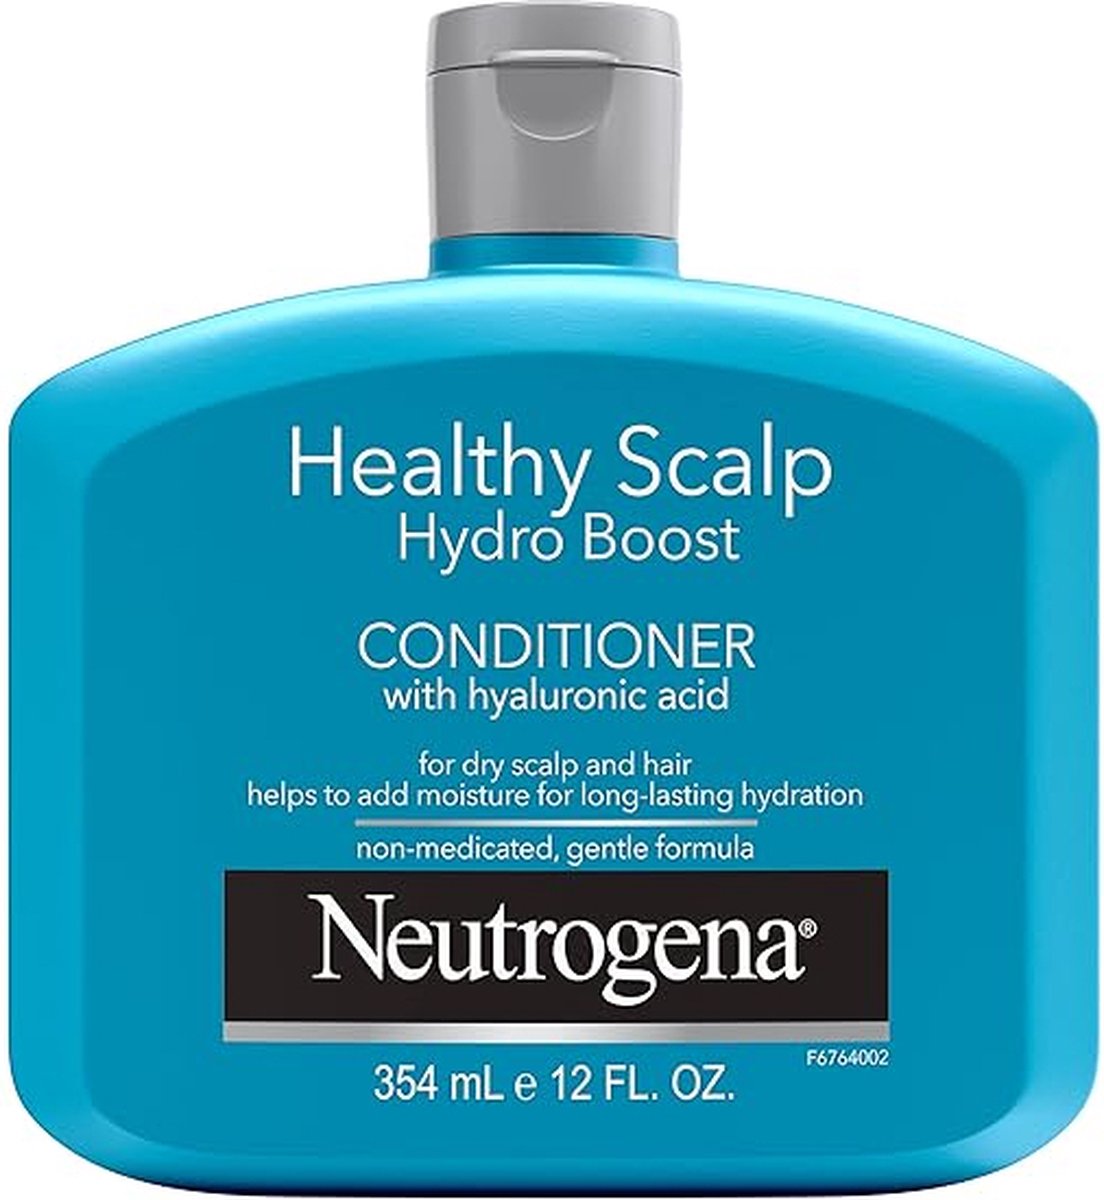 Neutrogena® Healthy Scalp Hydro Boost with Hyaluronic Acid Conditioner